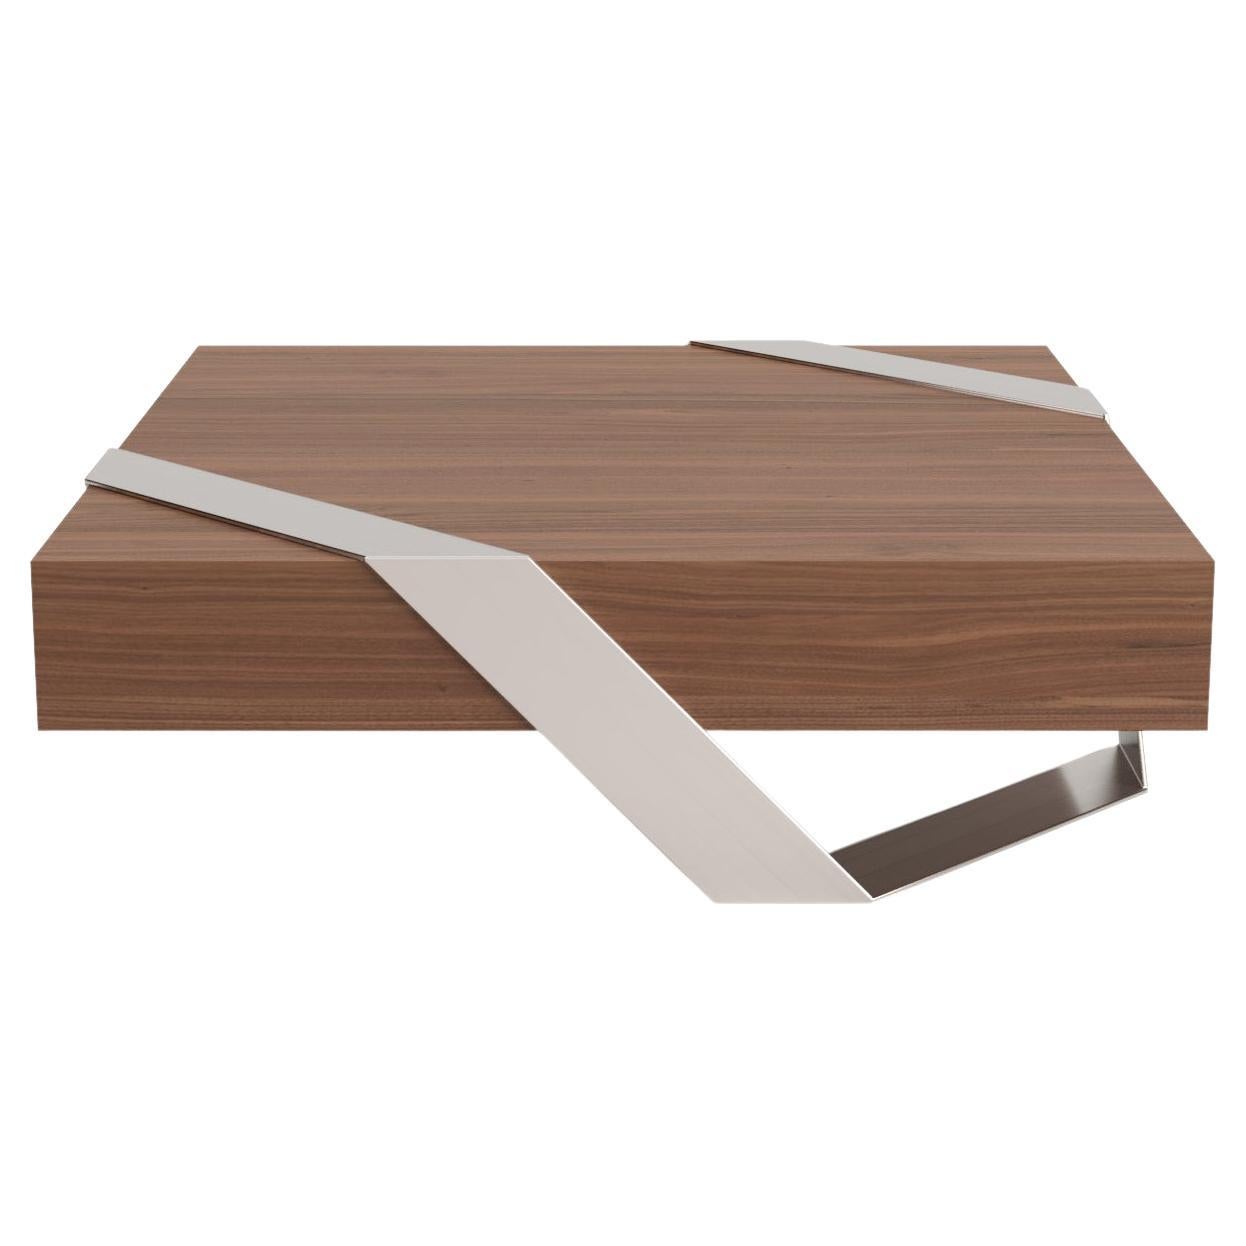 Modern Minimalist Square Center Coffee Table Walnut Wood Brushed Stainless Steel